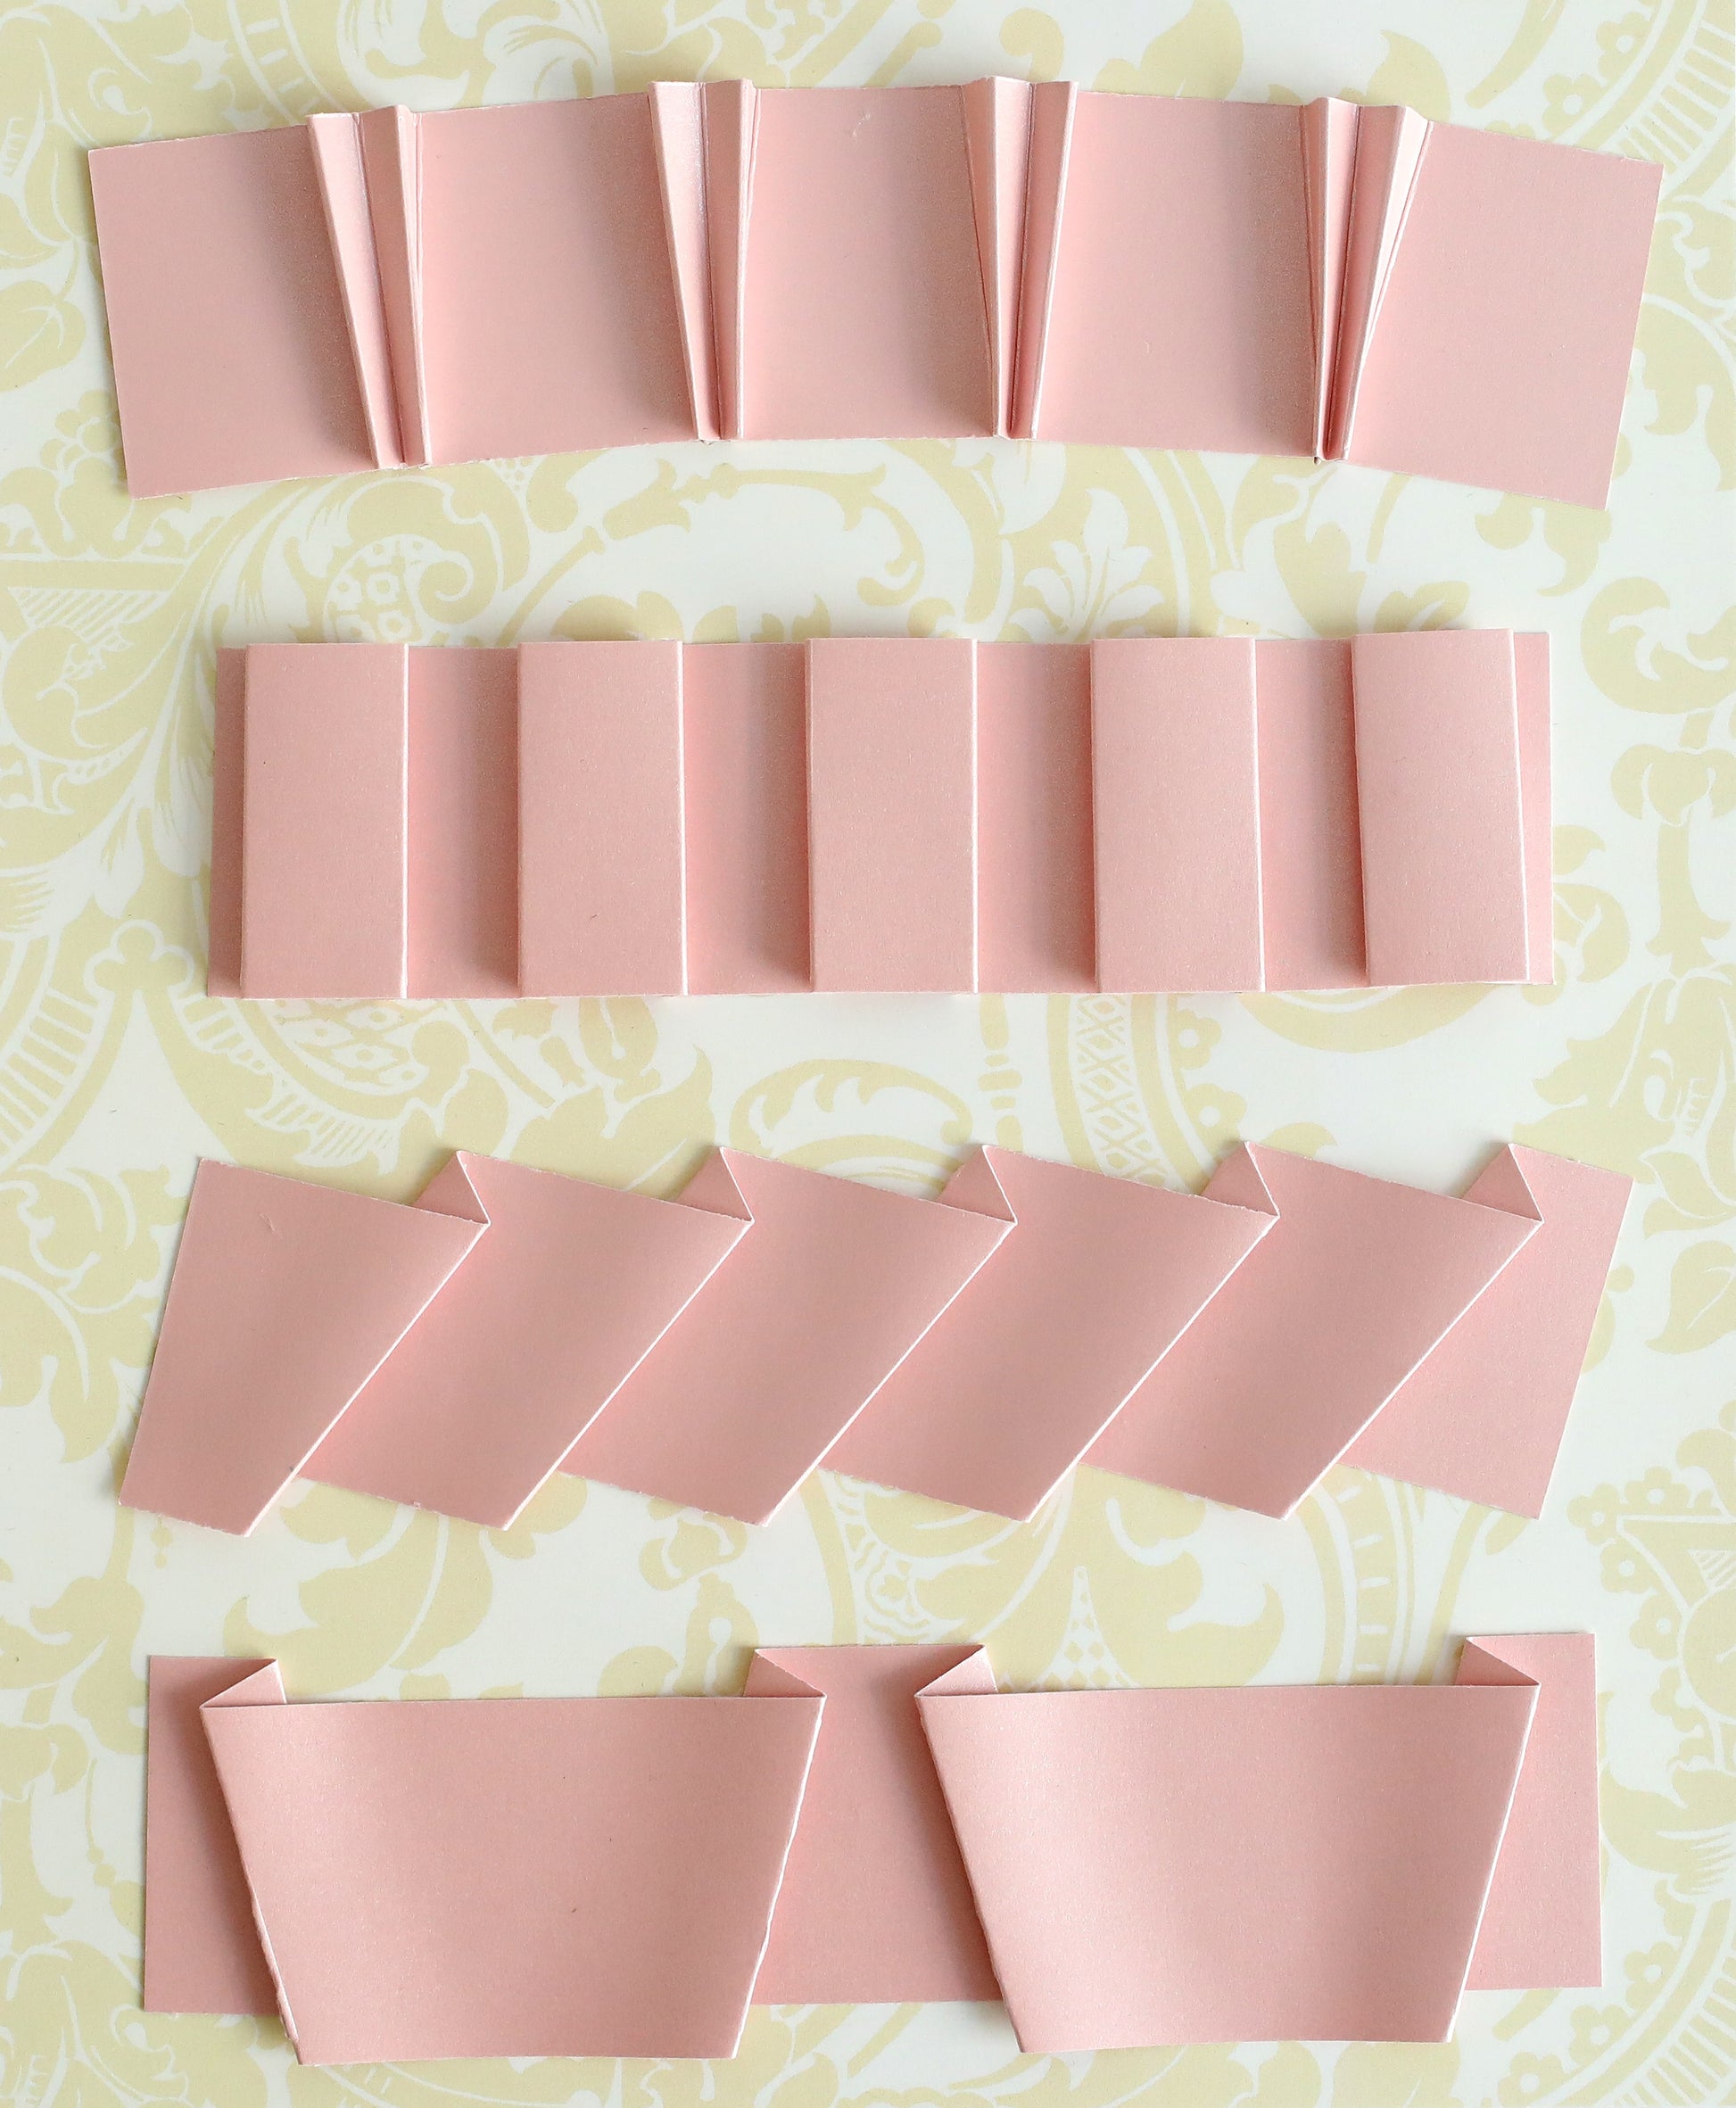 several pieces of pink folded paper on a table.